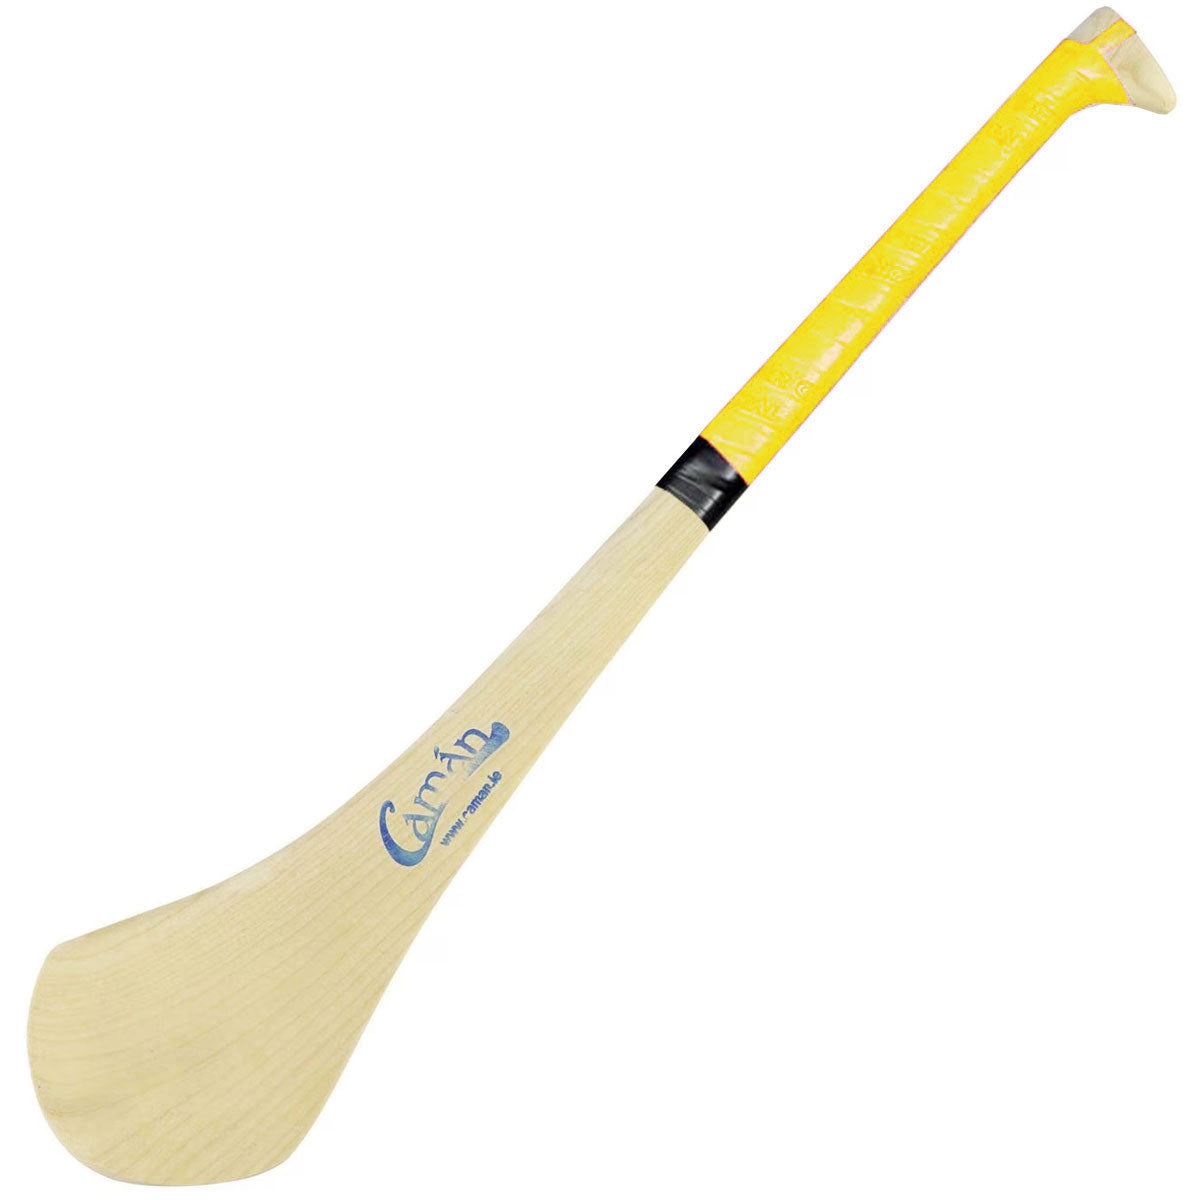 Caman Hurling Stick size 33 (Inches)